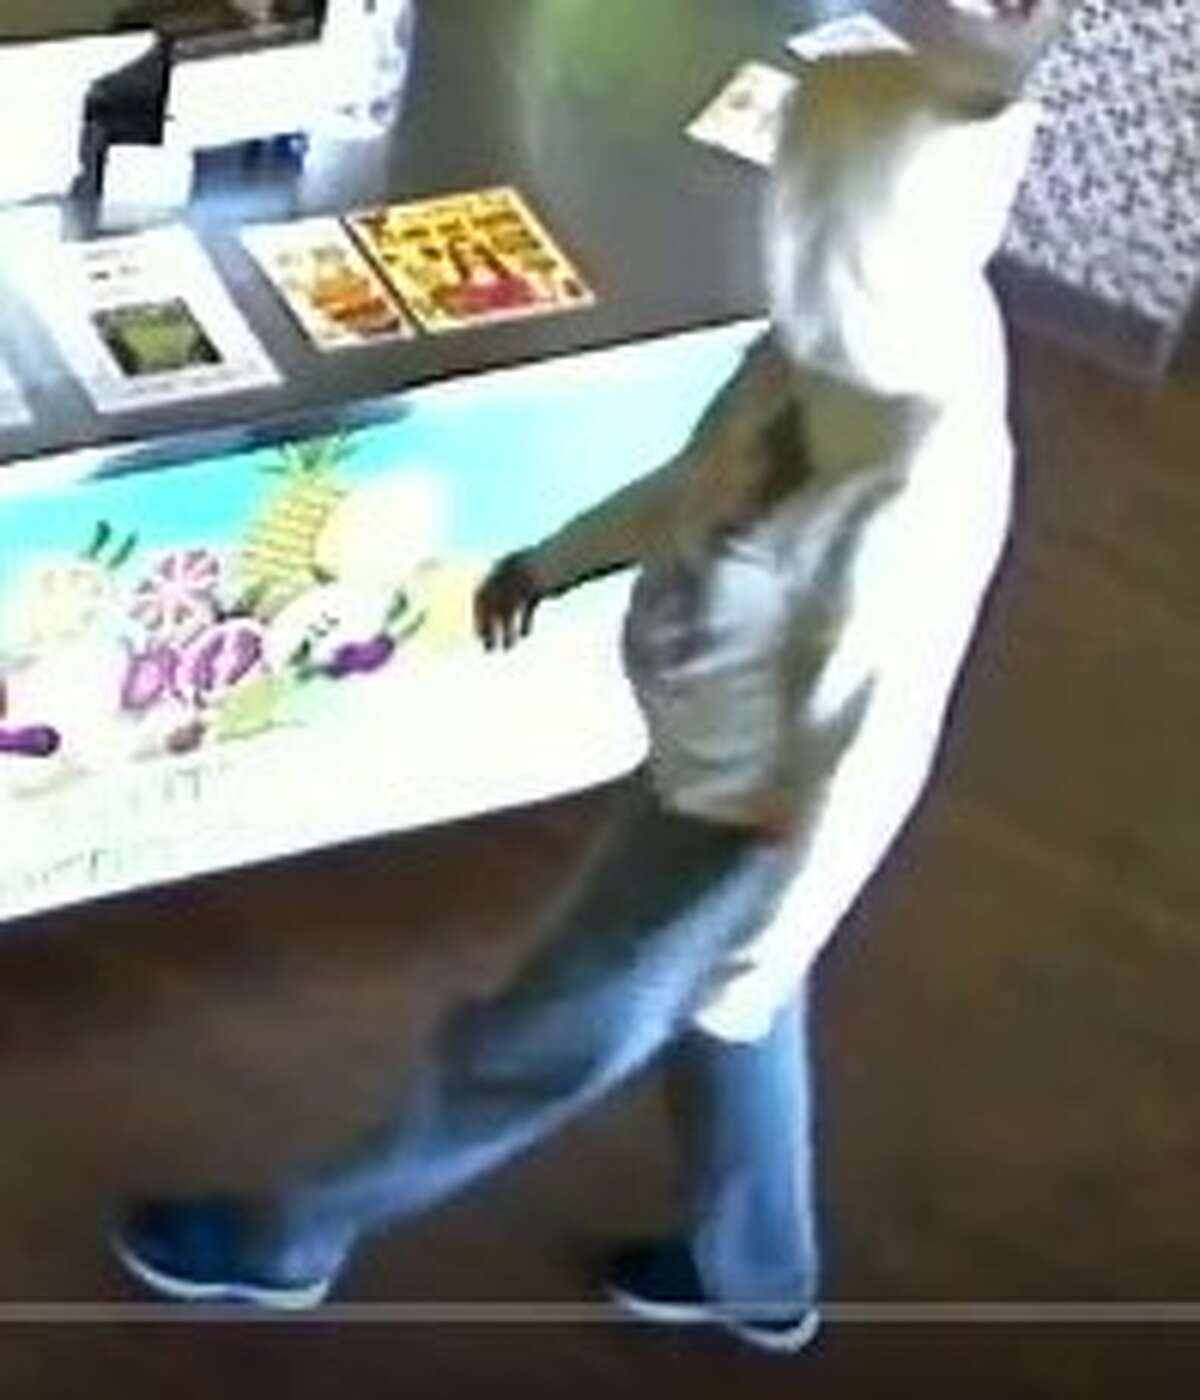 Police are looking for this suspect, who allegedly robbed a smoothie shop and assaulted an employee on Oct. 11, 2016 in the 5200 block of De Zavala Road.